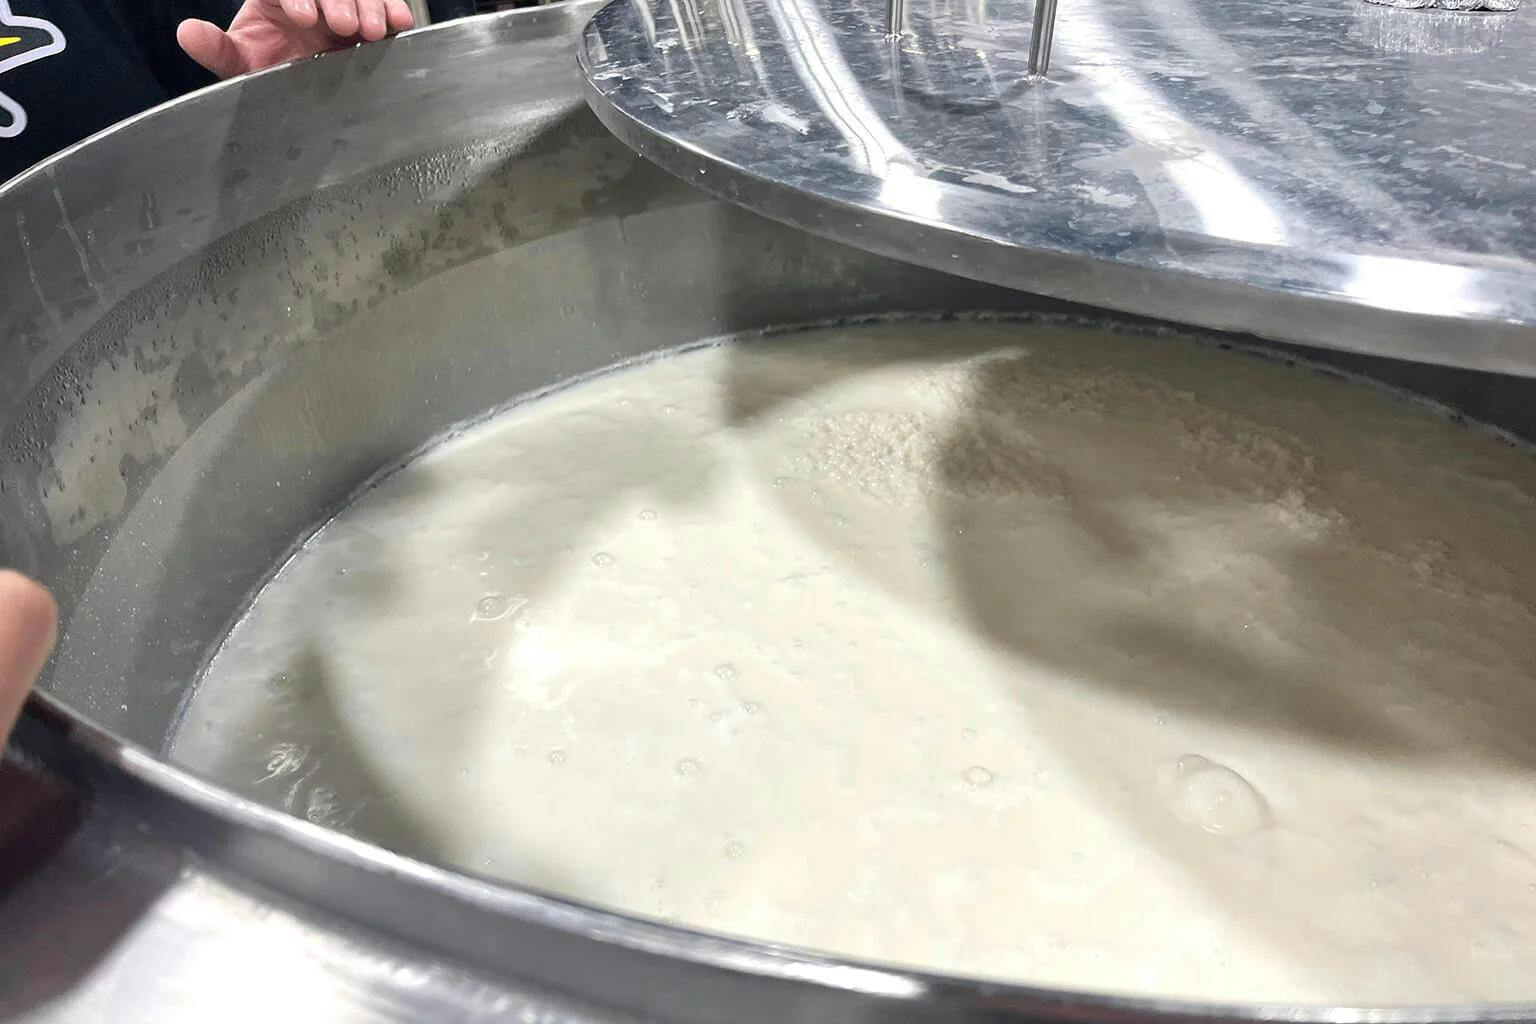 Sake mash for a small-batch kimoto sake bubbles as it ferments. It gives off the pleasant aroma of sweet rice milk. | Photo by Taylor Markarian.